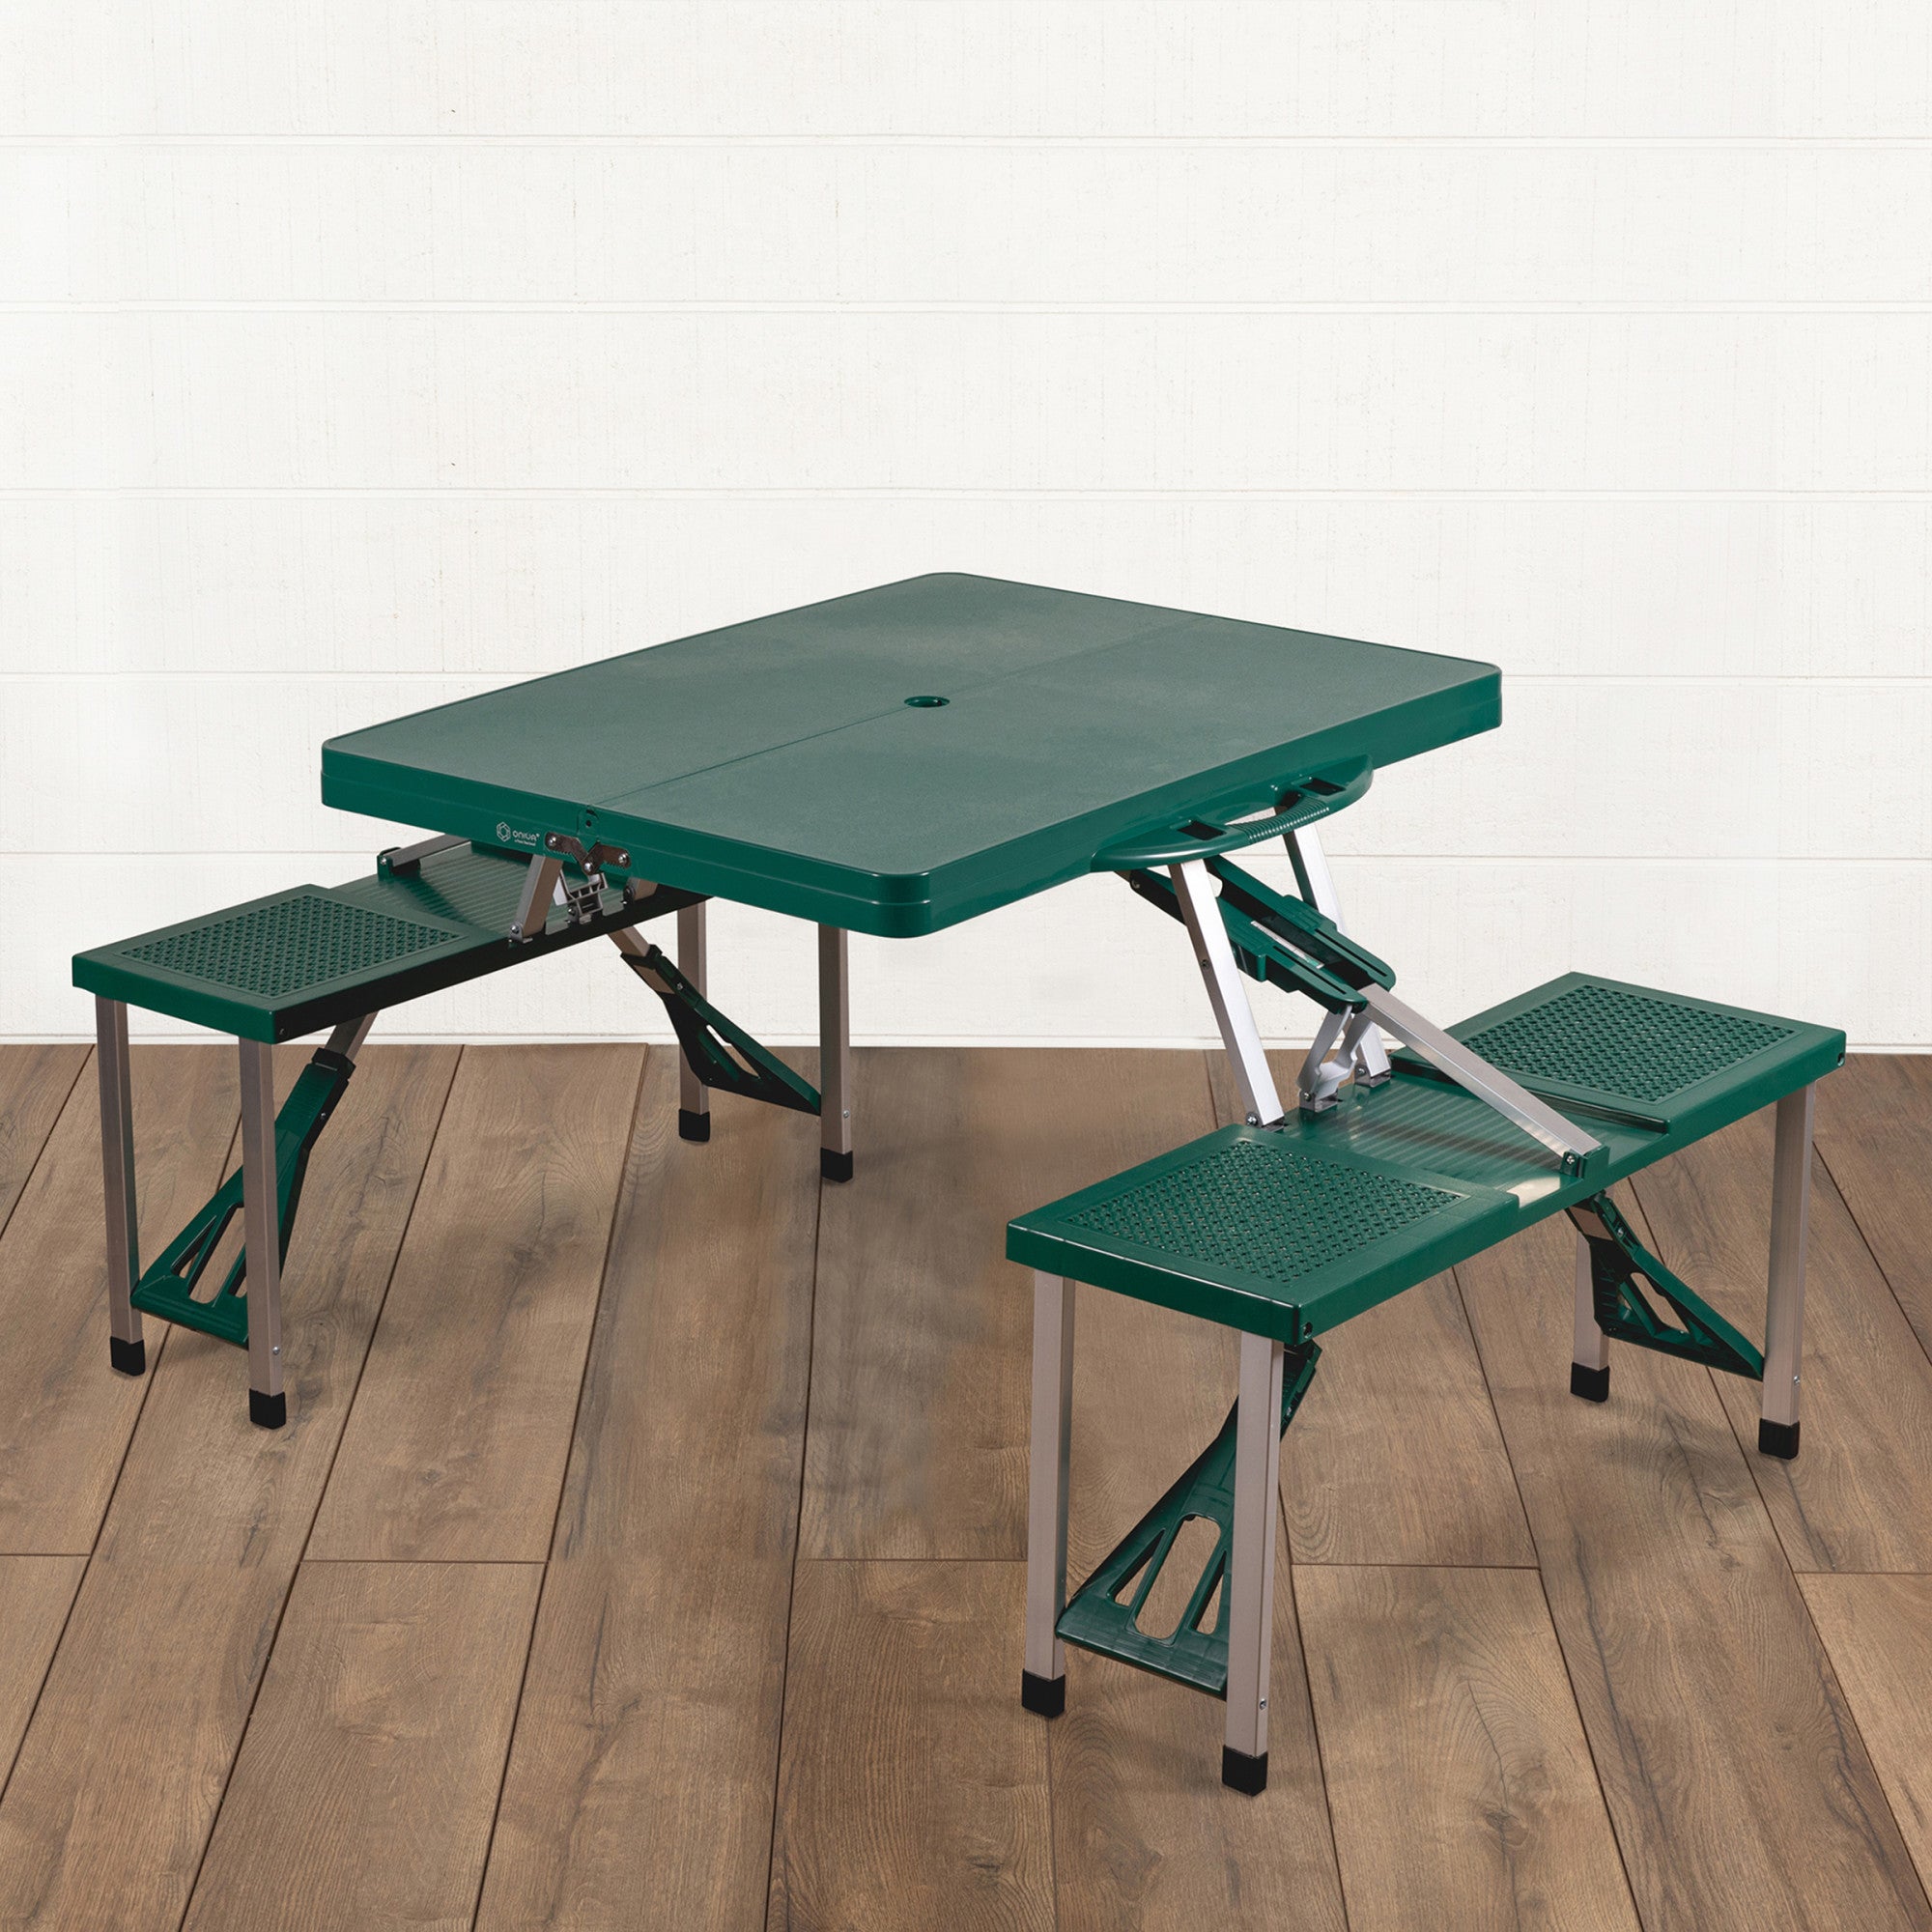 Folding Camping Table – Portal Outdoors